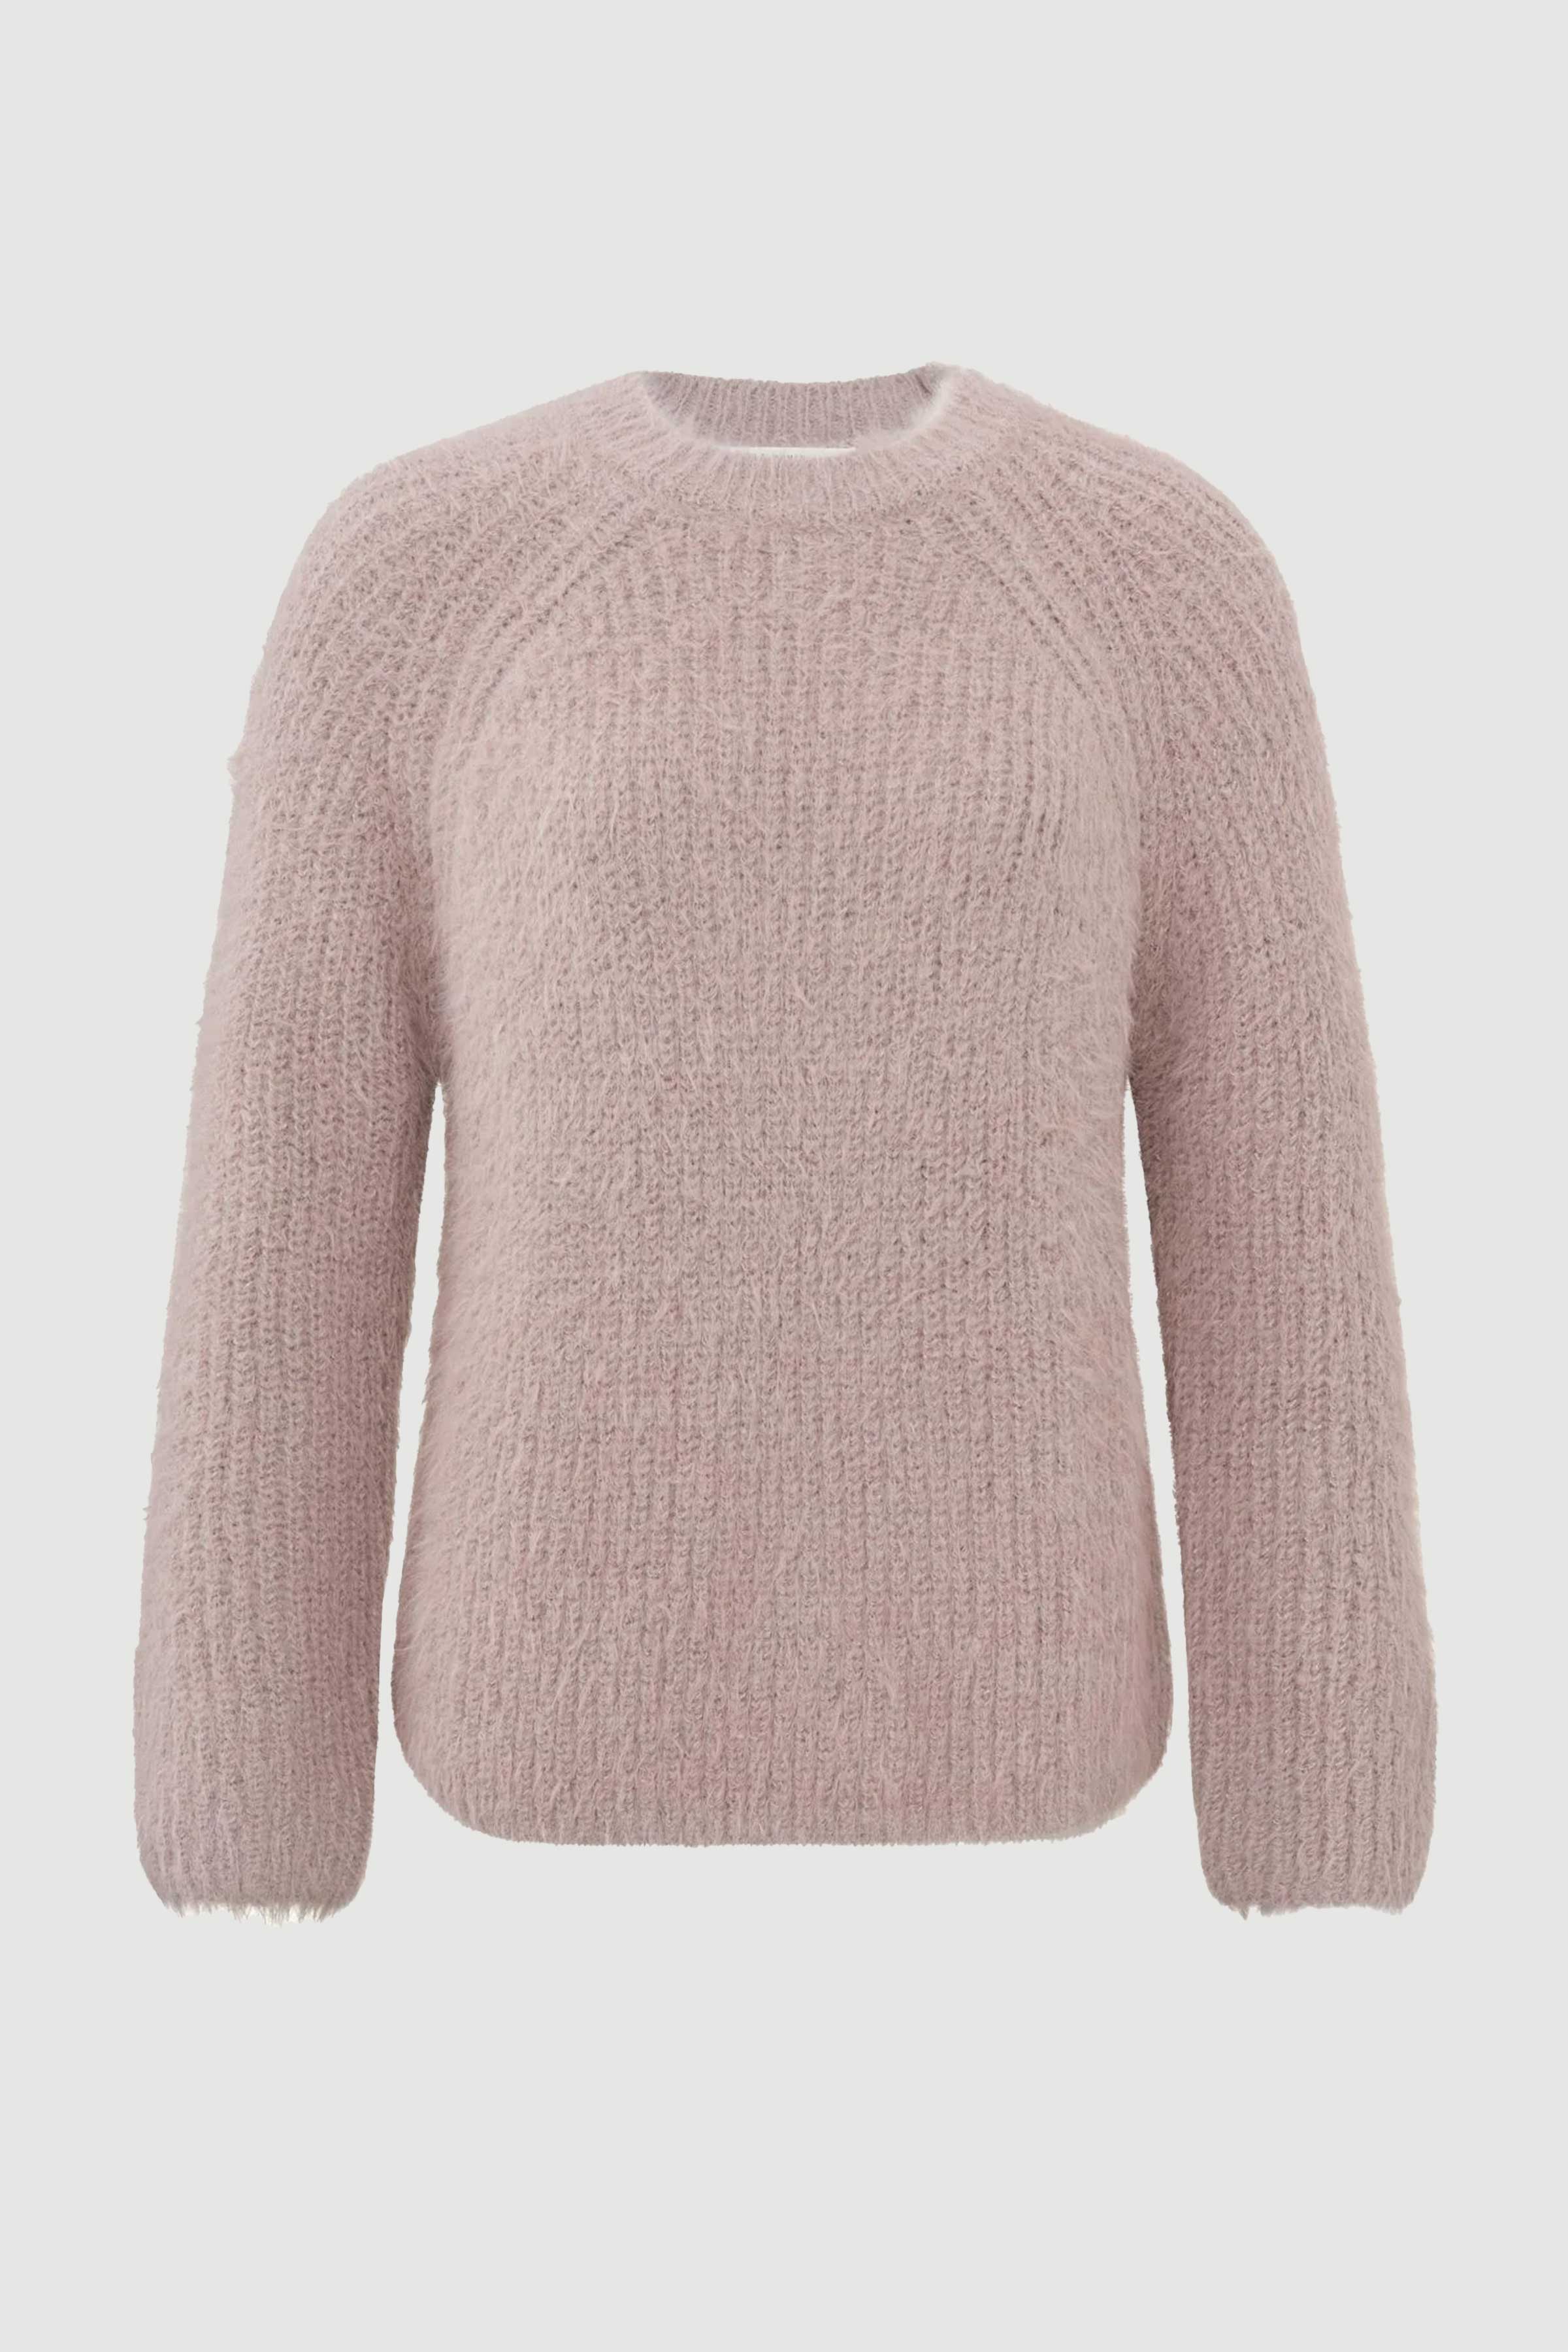 Fluffy Yarn Sweater in Deauville Mauve Pink Dessin